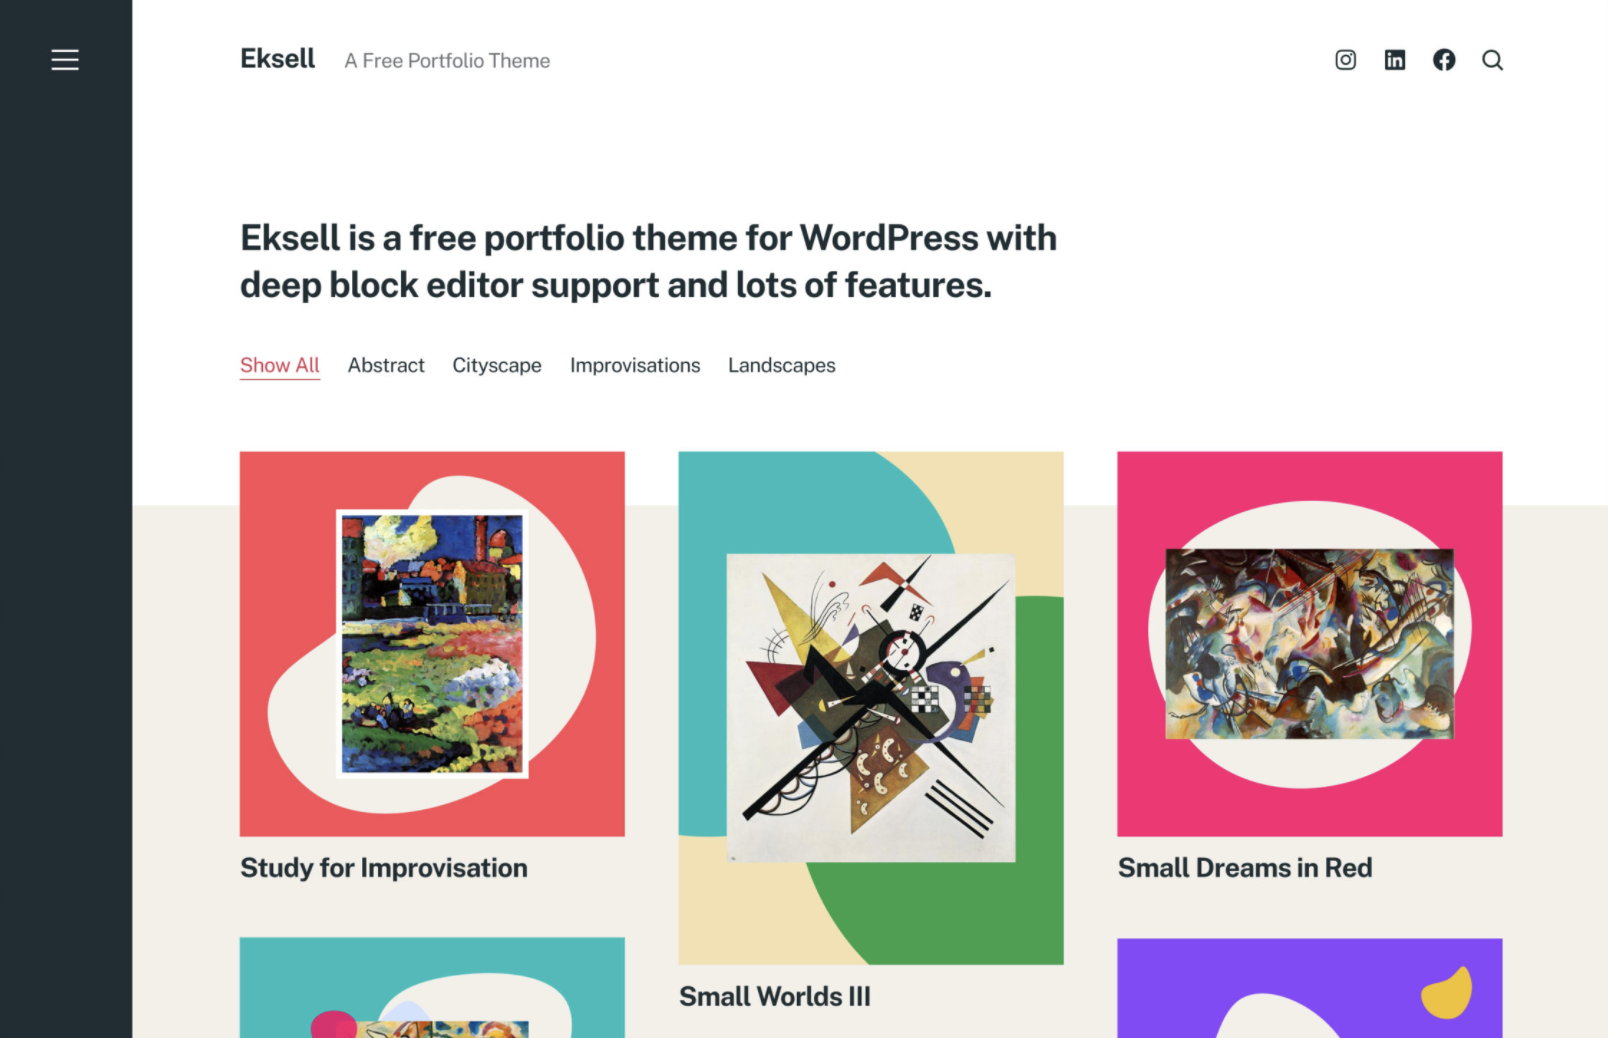 Eksell Portfolio Theme Now Available in WordPress Themes Directory